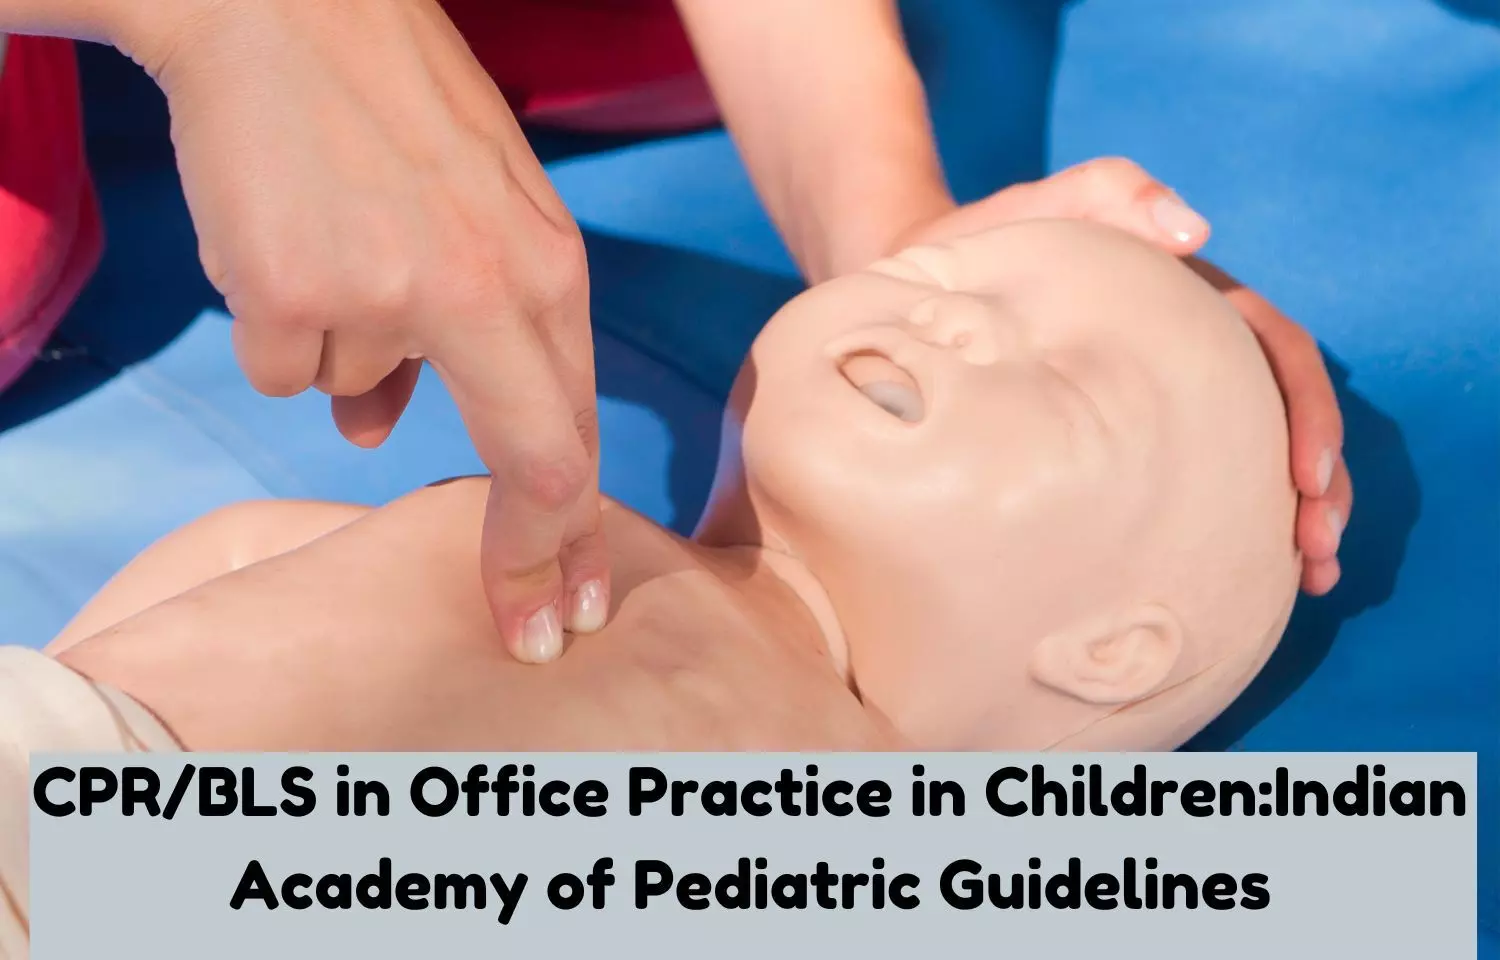 Cardiopulmonary resuscitation and Basic life support in Office Practice in Children: IAP Guidelines